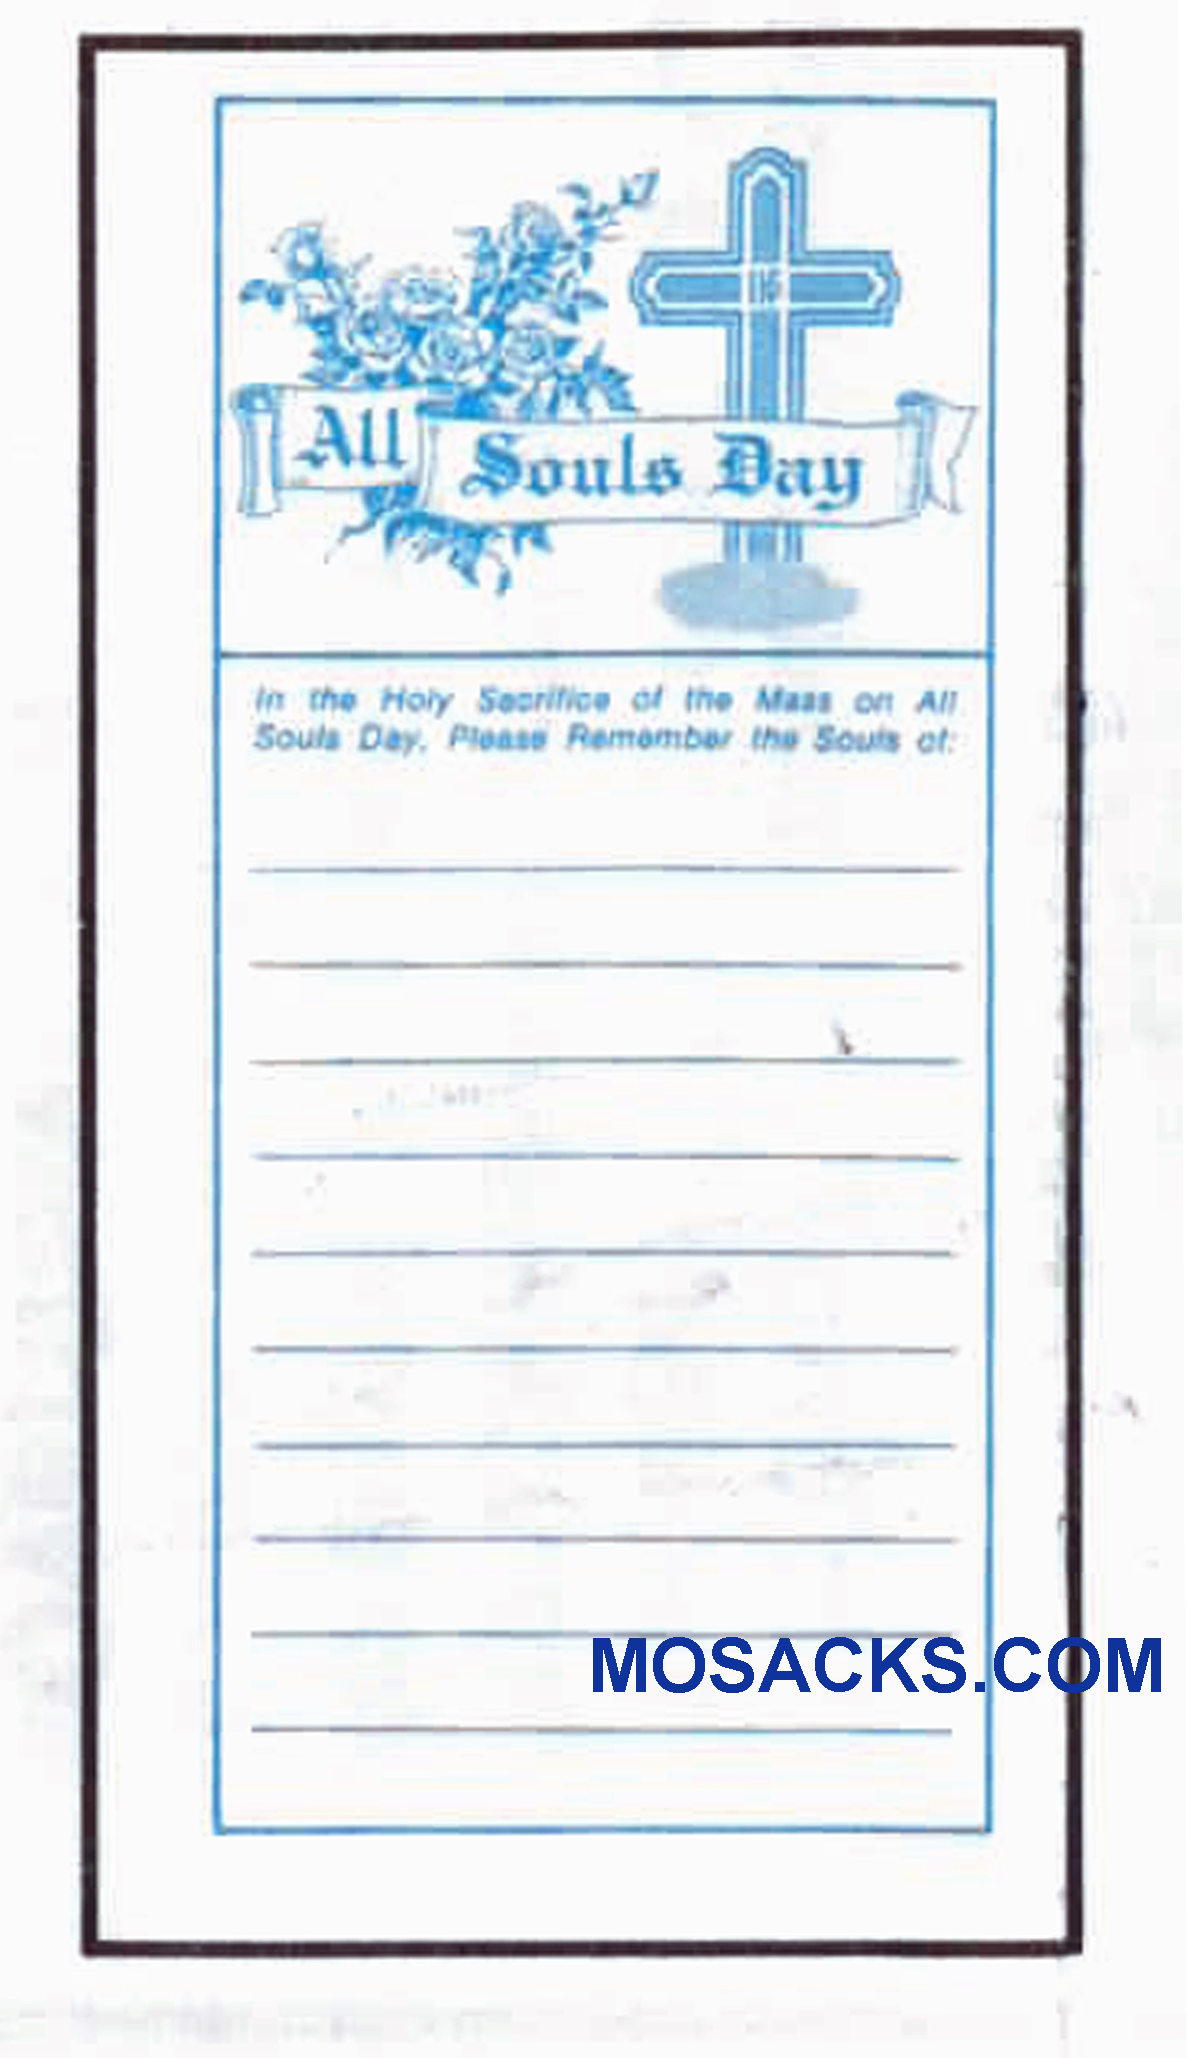 All Souls Day Offering Envelope 6-1/4 x 3-1/8 #304-332